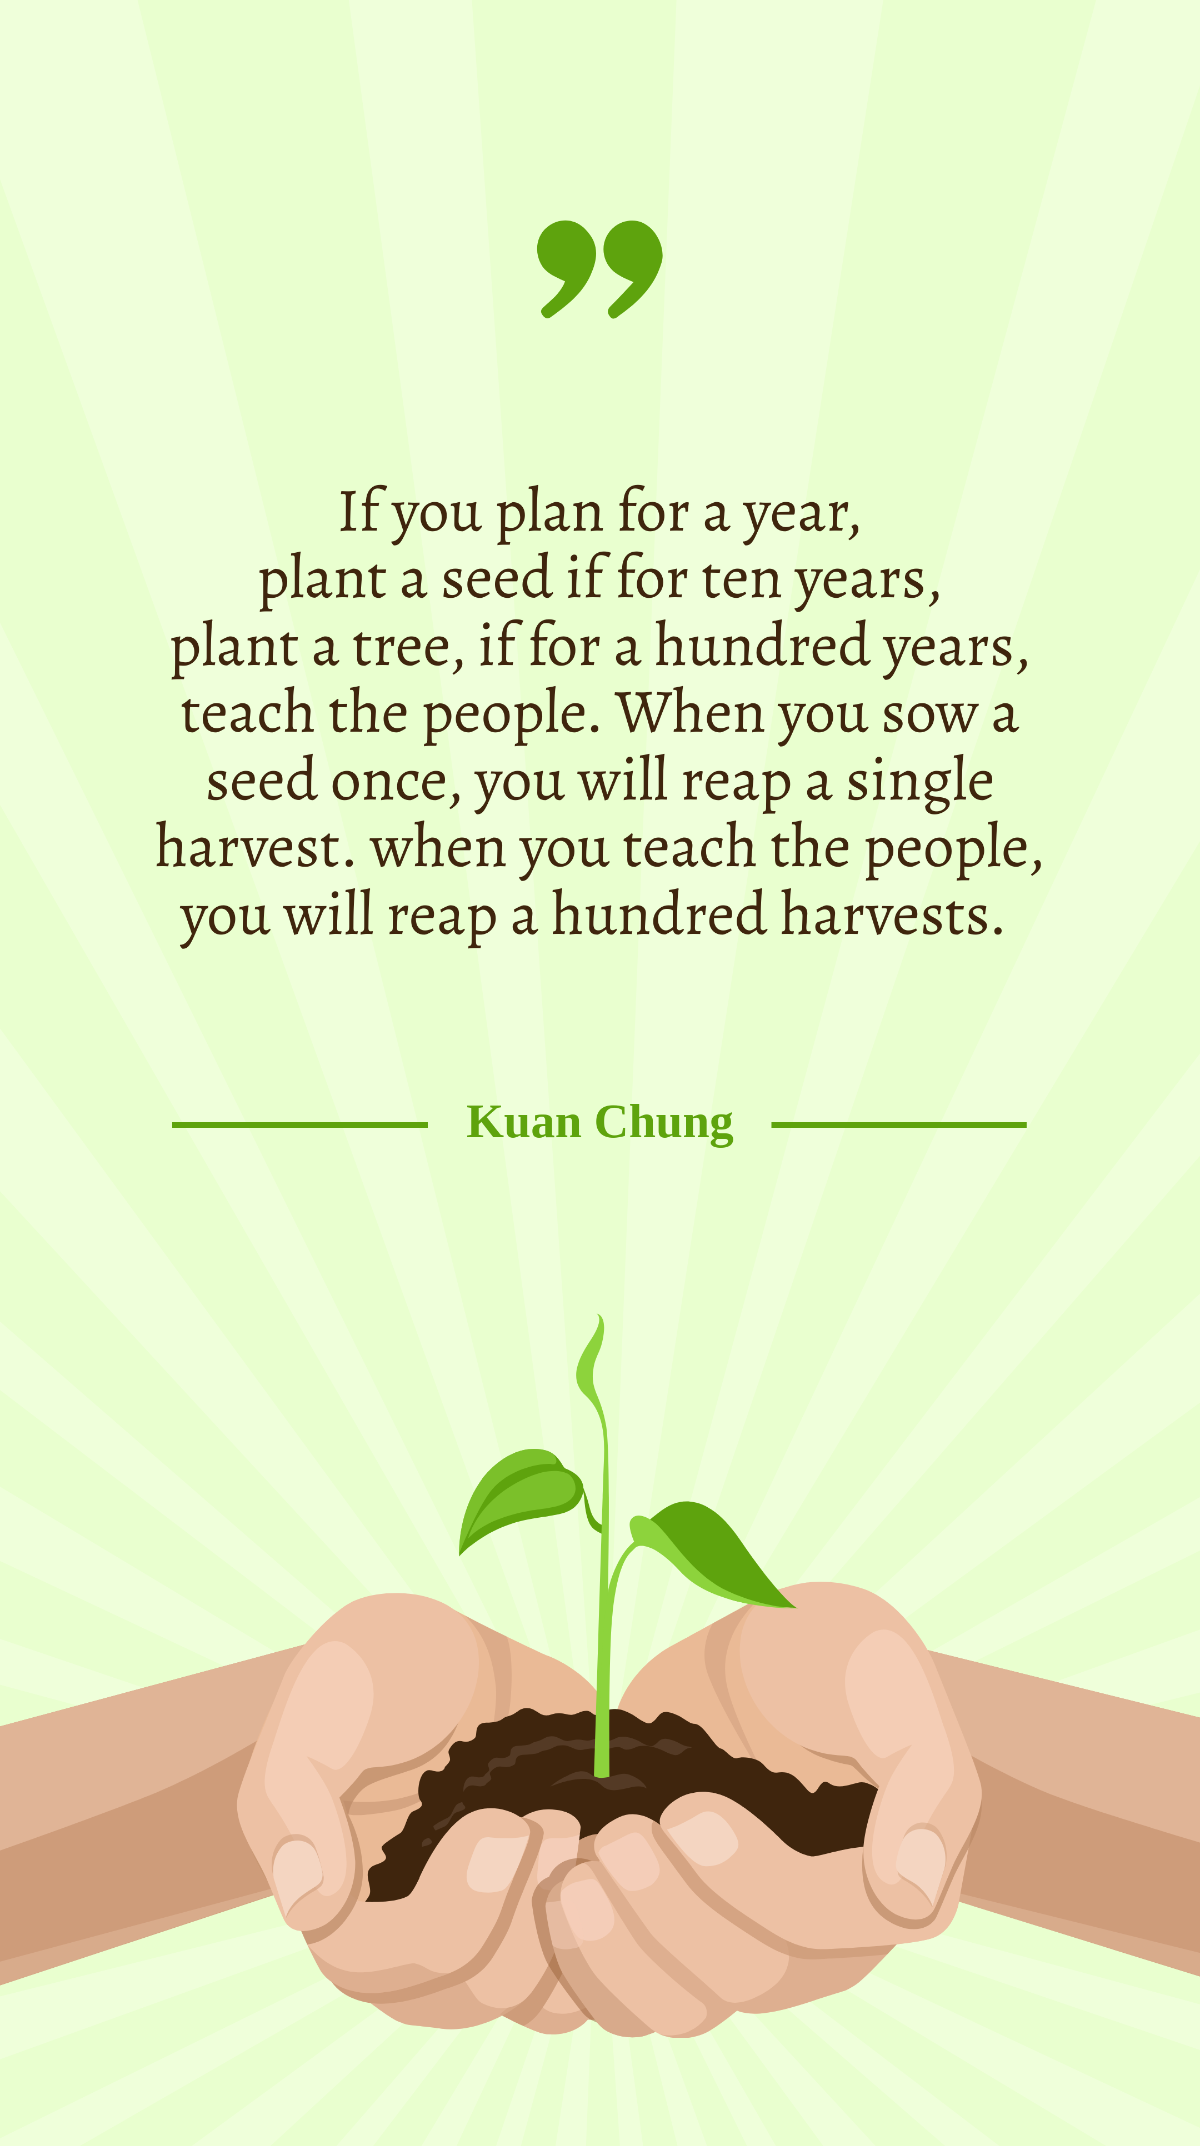 Kuan Chung - If you plan for a year, plant a seed if for ten years, plant a tree, if for a hundred years, teach the people. When you sow a seed once, you will reap a single harvest. when you teach the